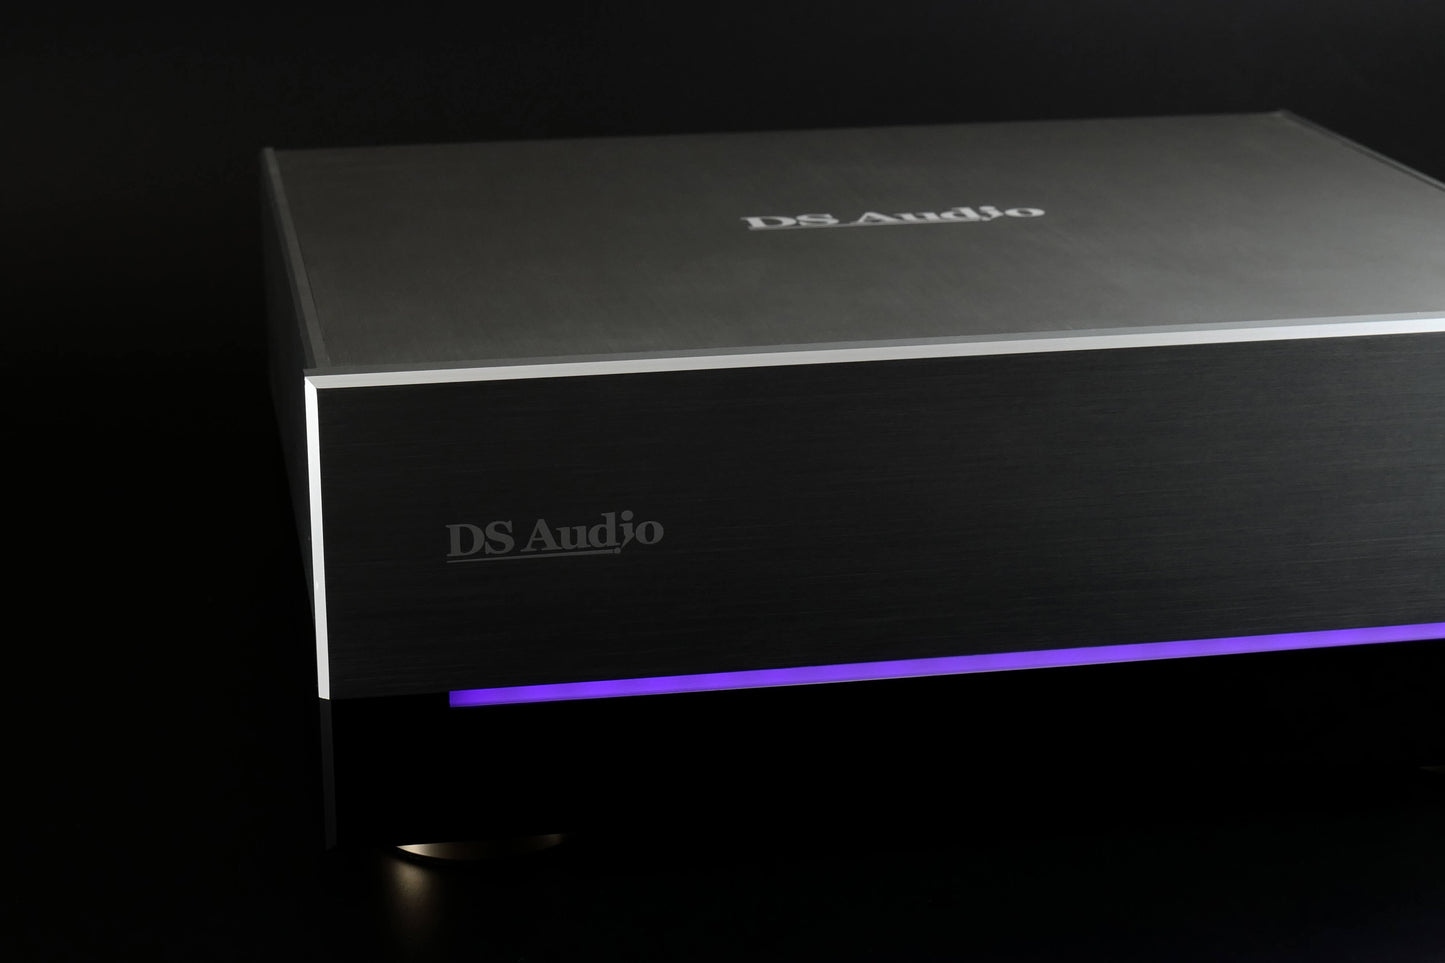 DS Audio DS Master1 System